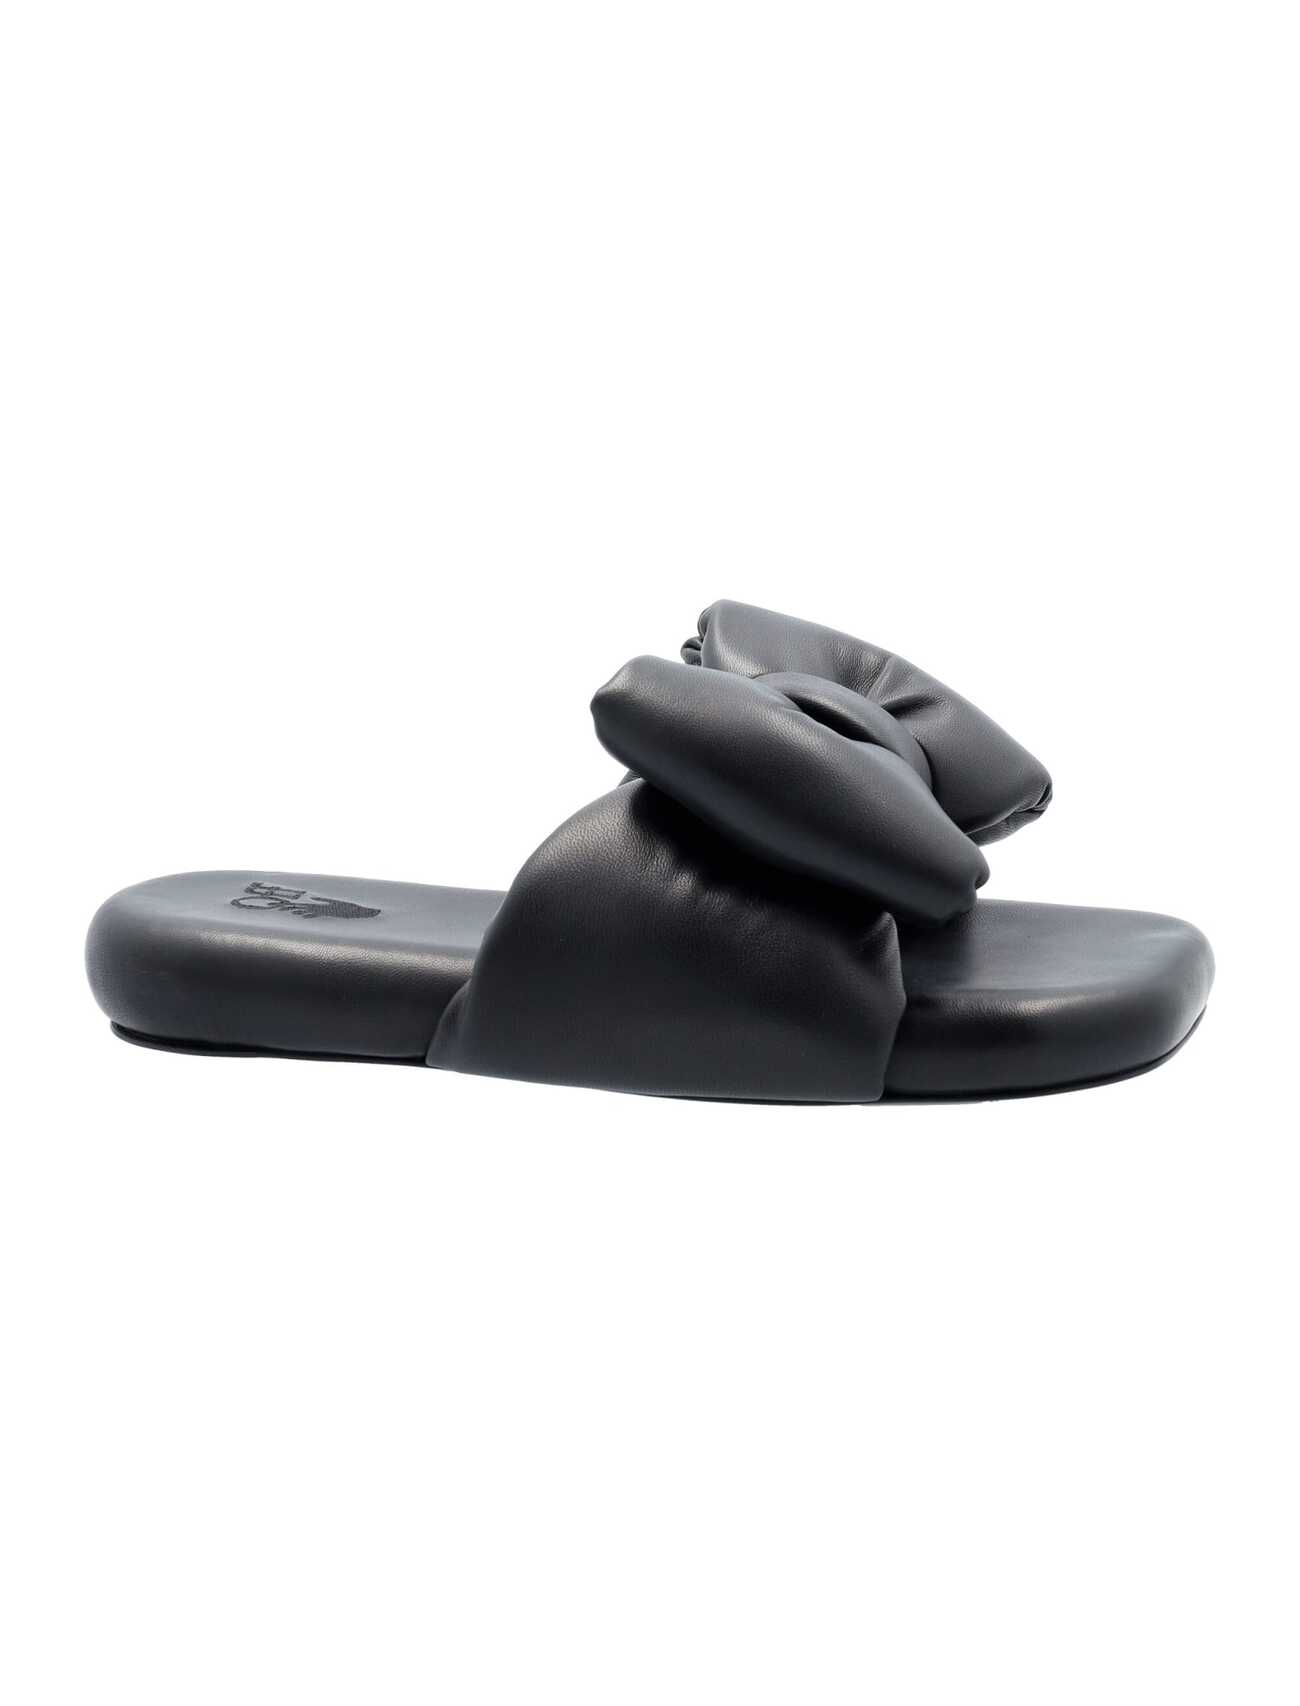 Off-White Nappa Extra Padded Slippers in black